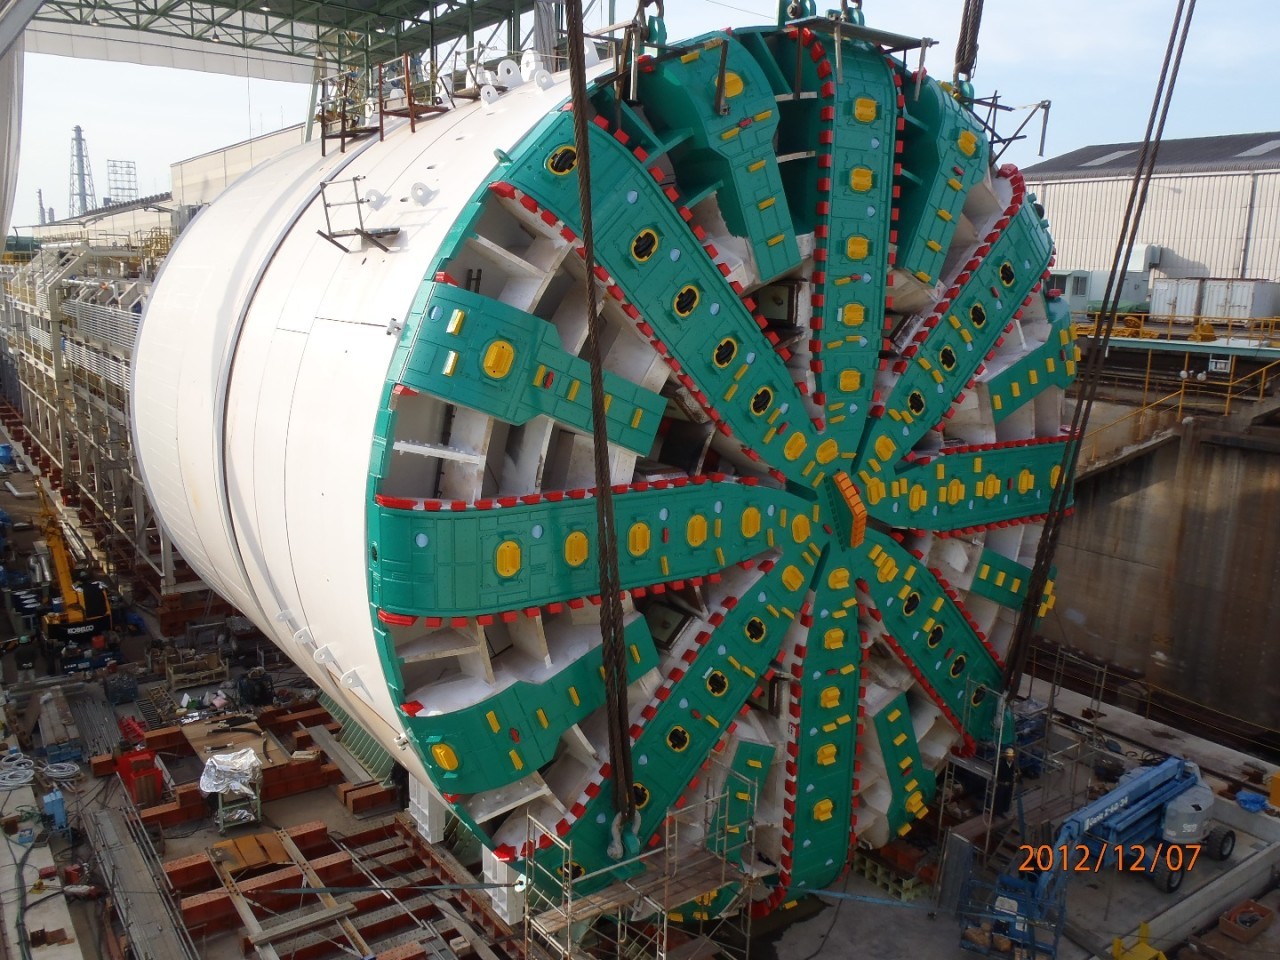 https://s1.cdn.autoevolution.com/images/news/gallery/big-bertha-a-25000-hp-mechanical-worm-designed-in-japan-for-american-drilling_3.jpg